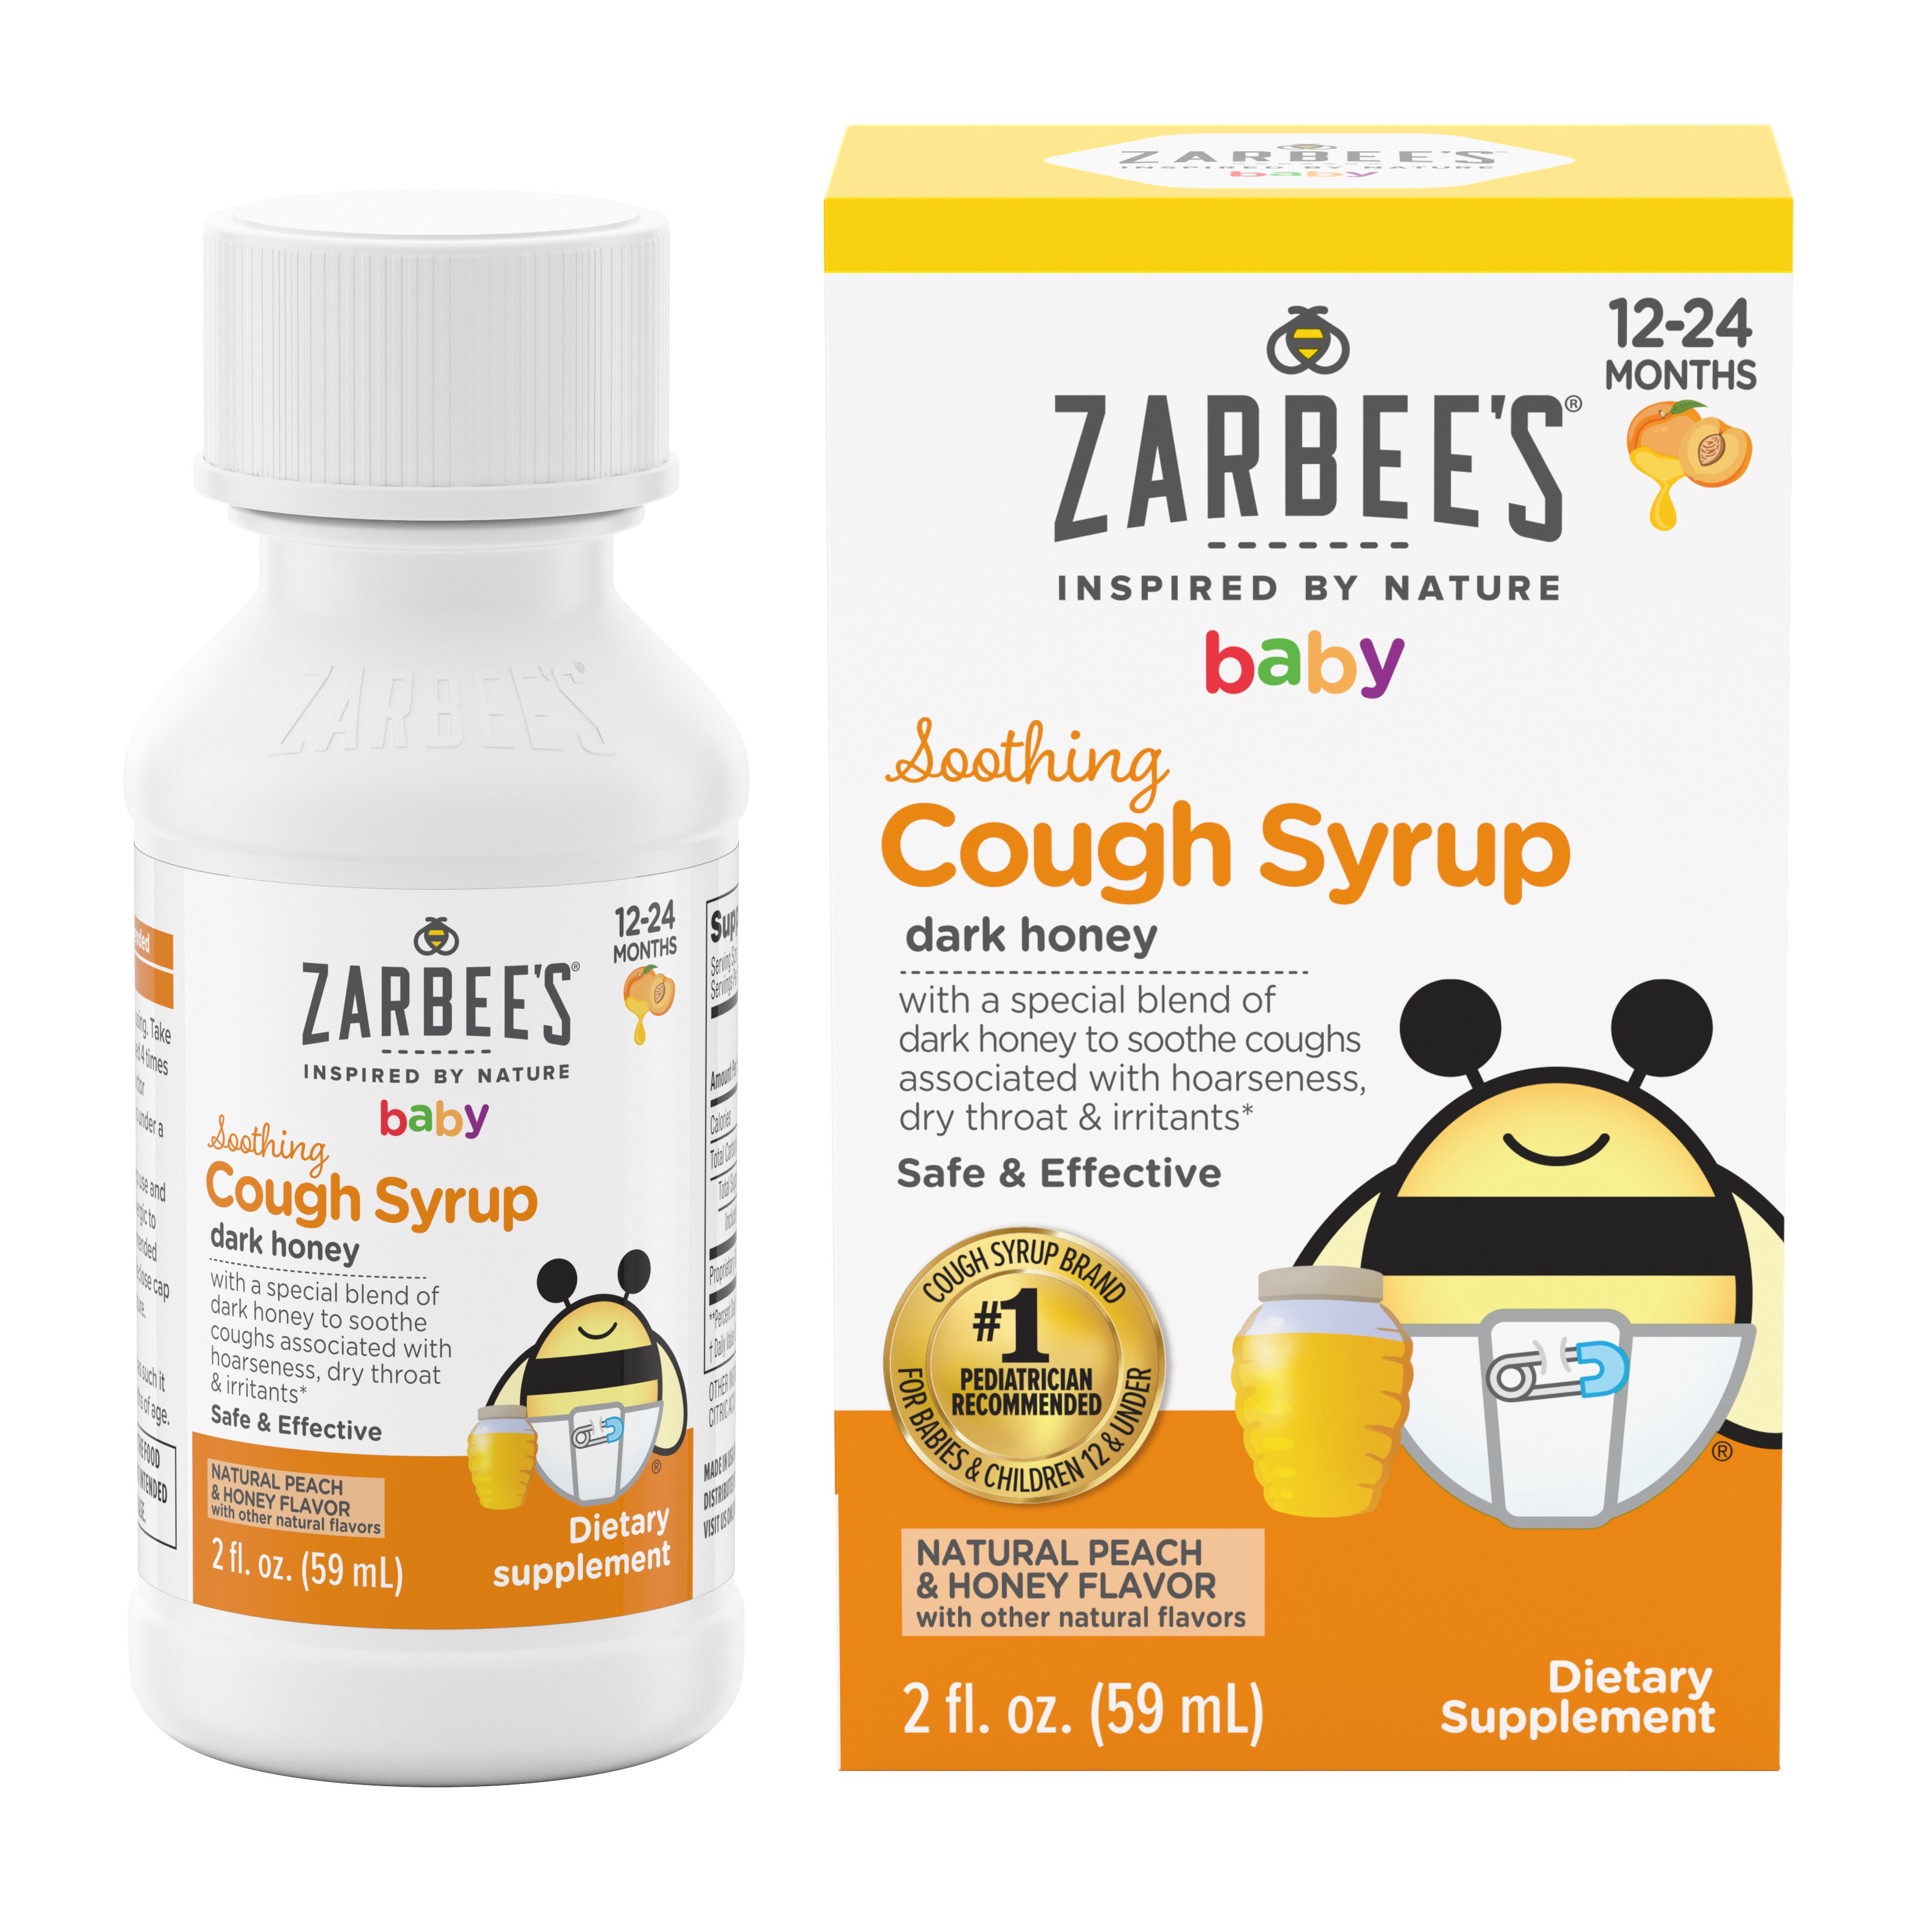 slide 5 of 5, Zarbee's Naturals Soothing Baby Cough Syrup, Drug & Alcohol-Free Toddler Cough Relief with Dark Honey, Natural Peach and Honey Flavor, 2 Fl Oz, 2 fl oz